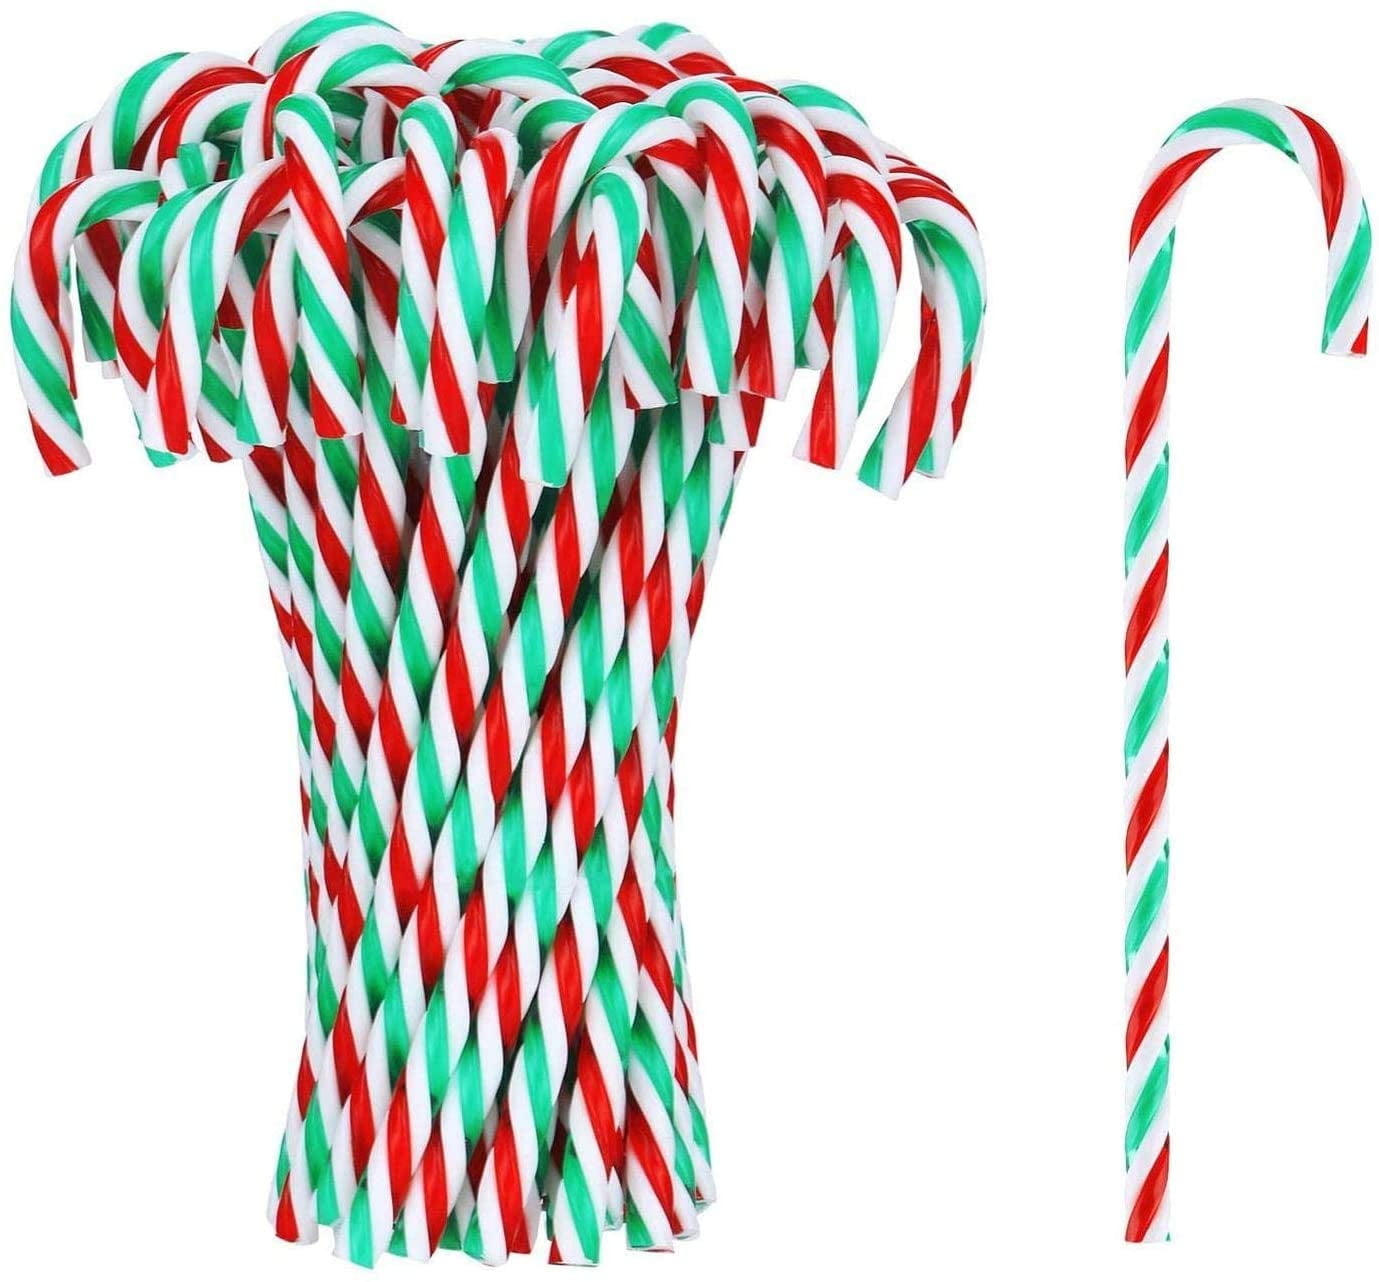 41" Mini Candy Cane with Swirl Resin Statue Holiday Prop Display 